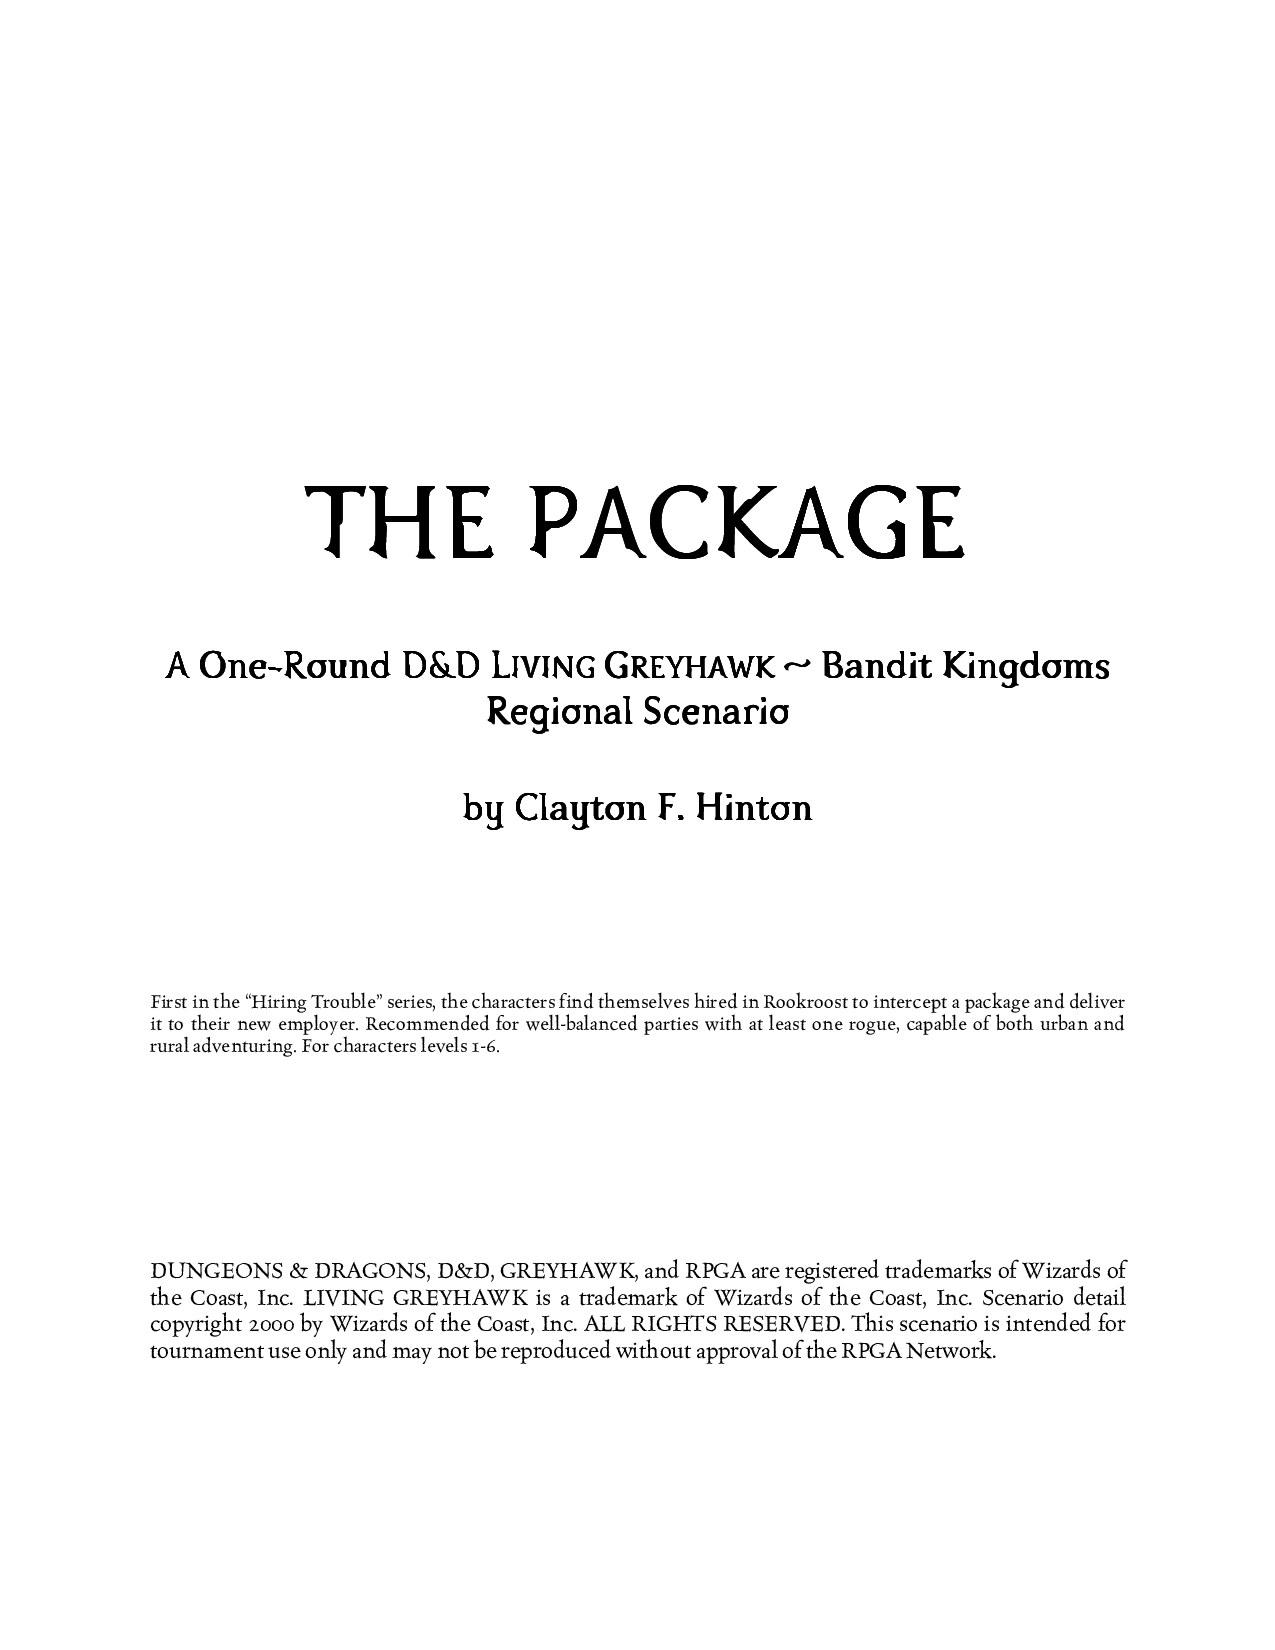 The Package - first in the "Hiring Trouble" series